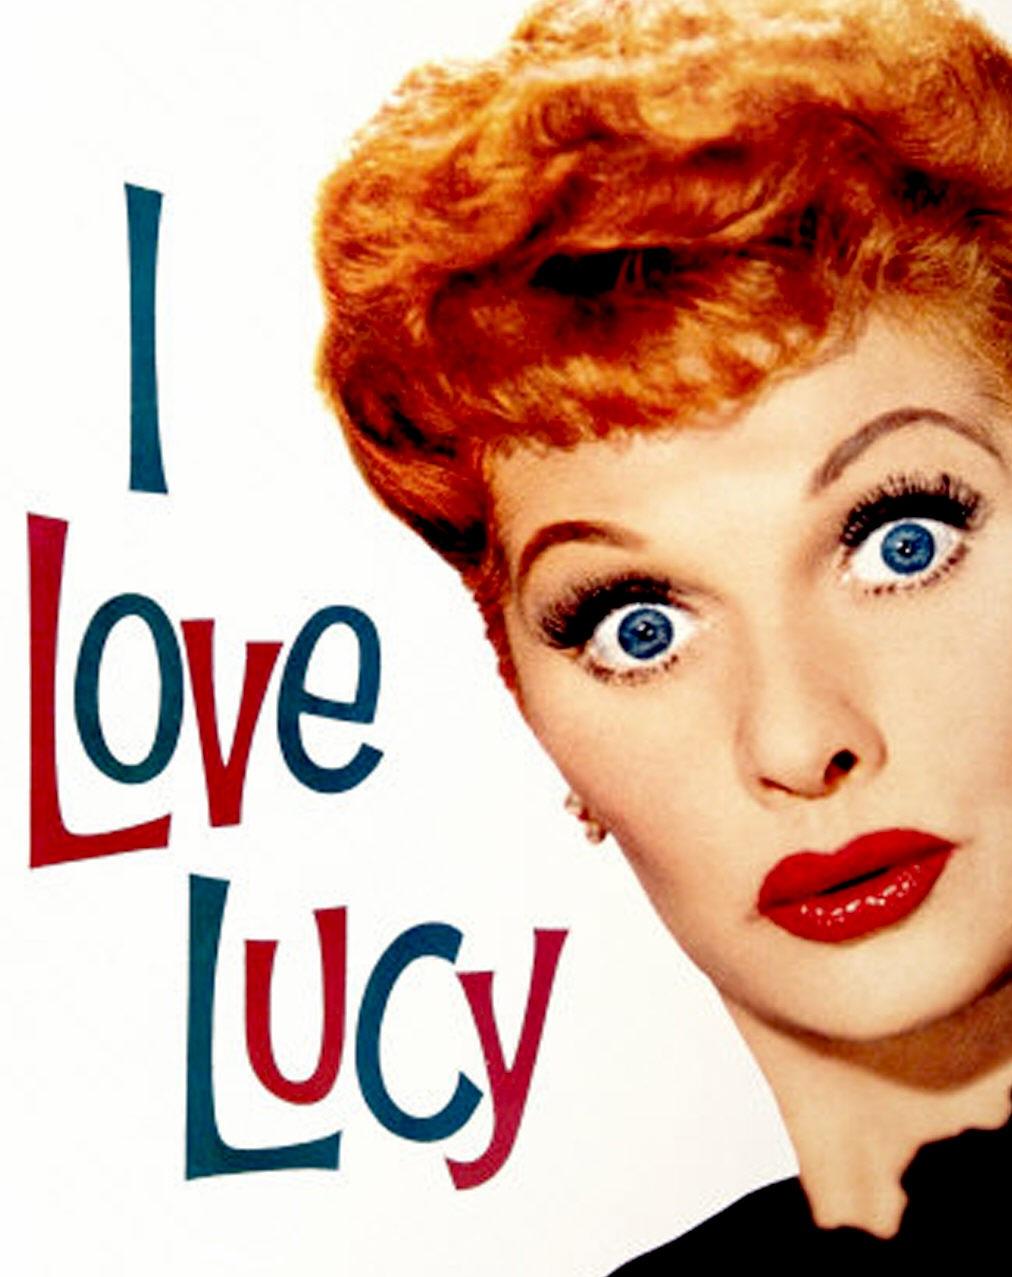 Love Lucy Showt I Mon527